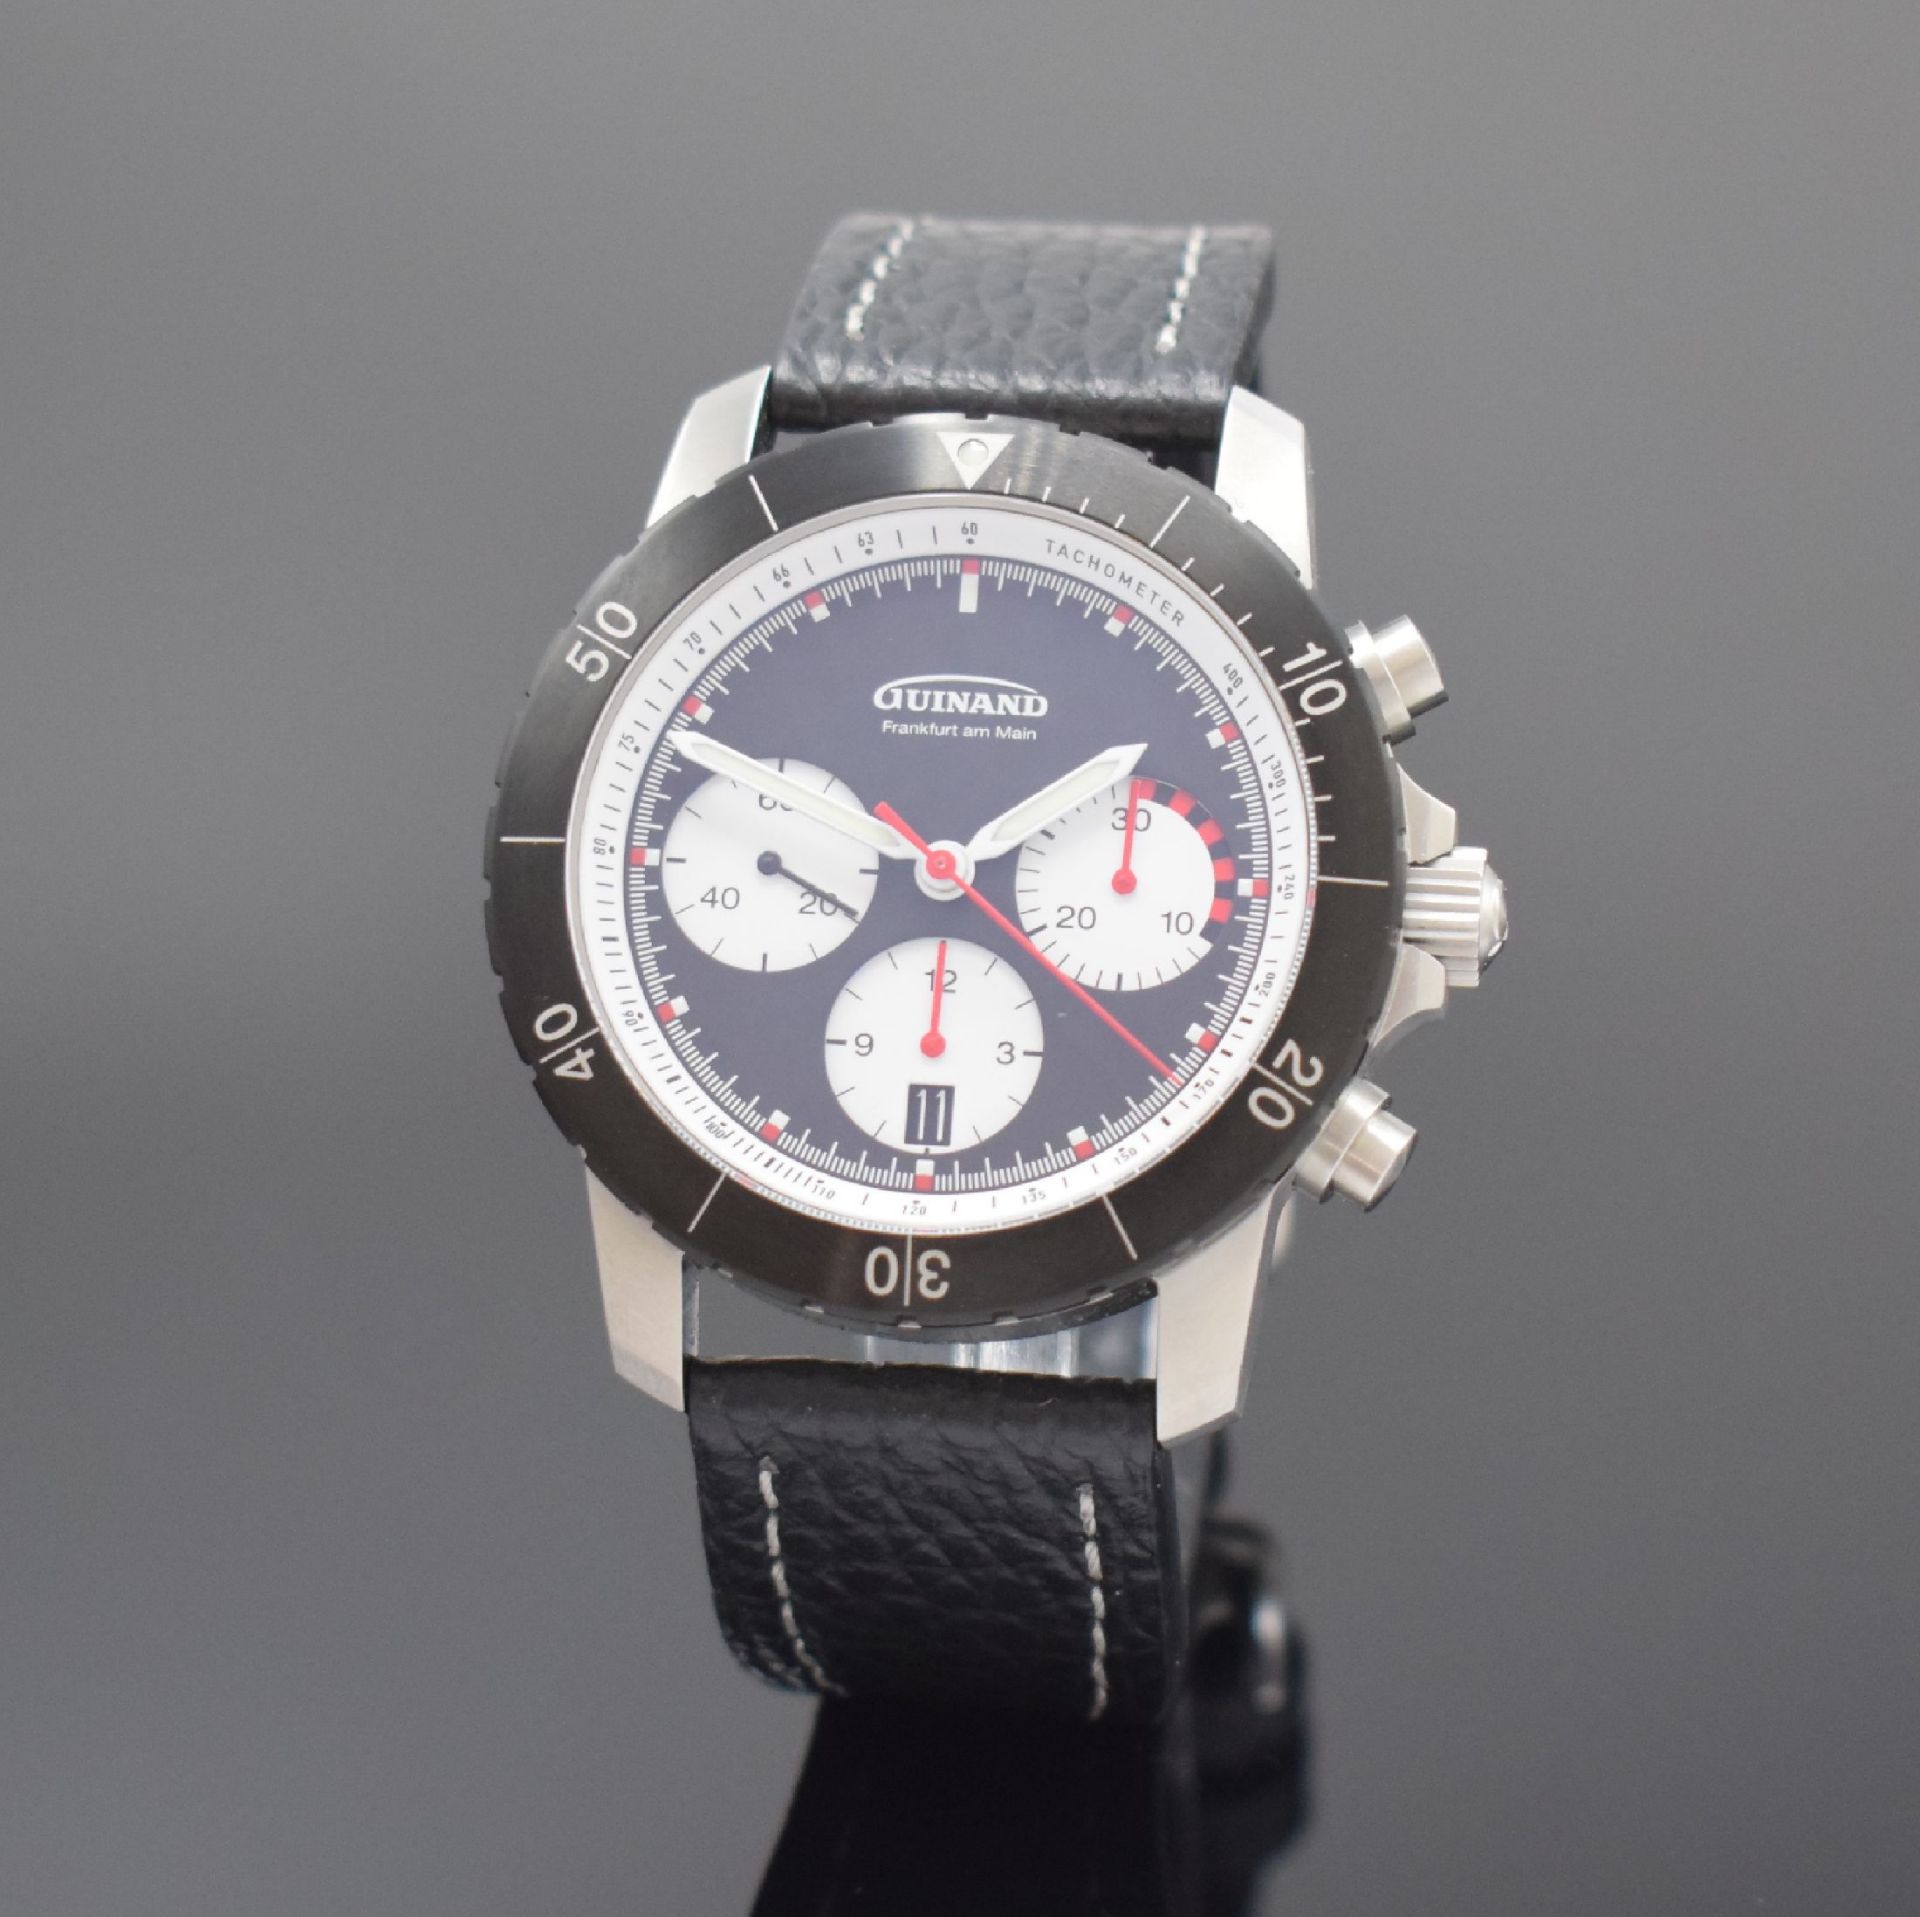 GUINAND Jubiläums-Armbandchronograph in Stahl, Automatik,